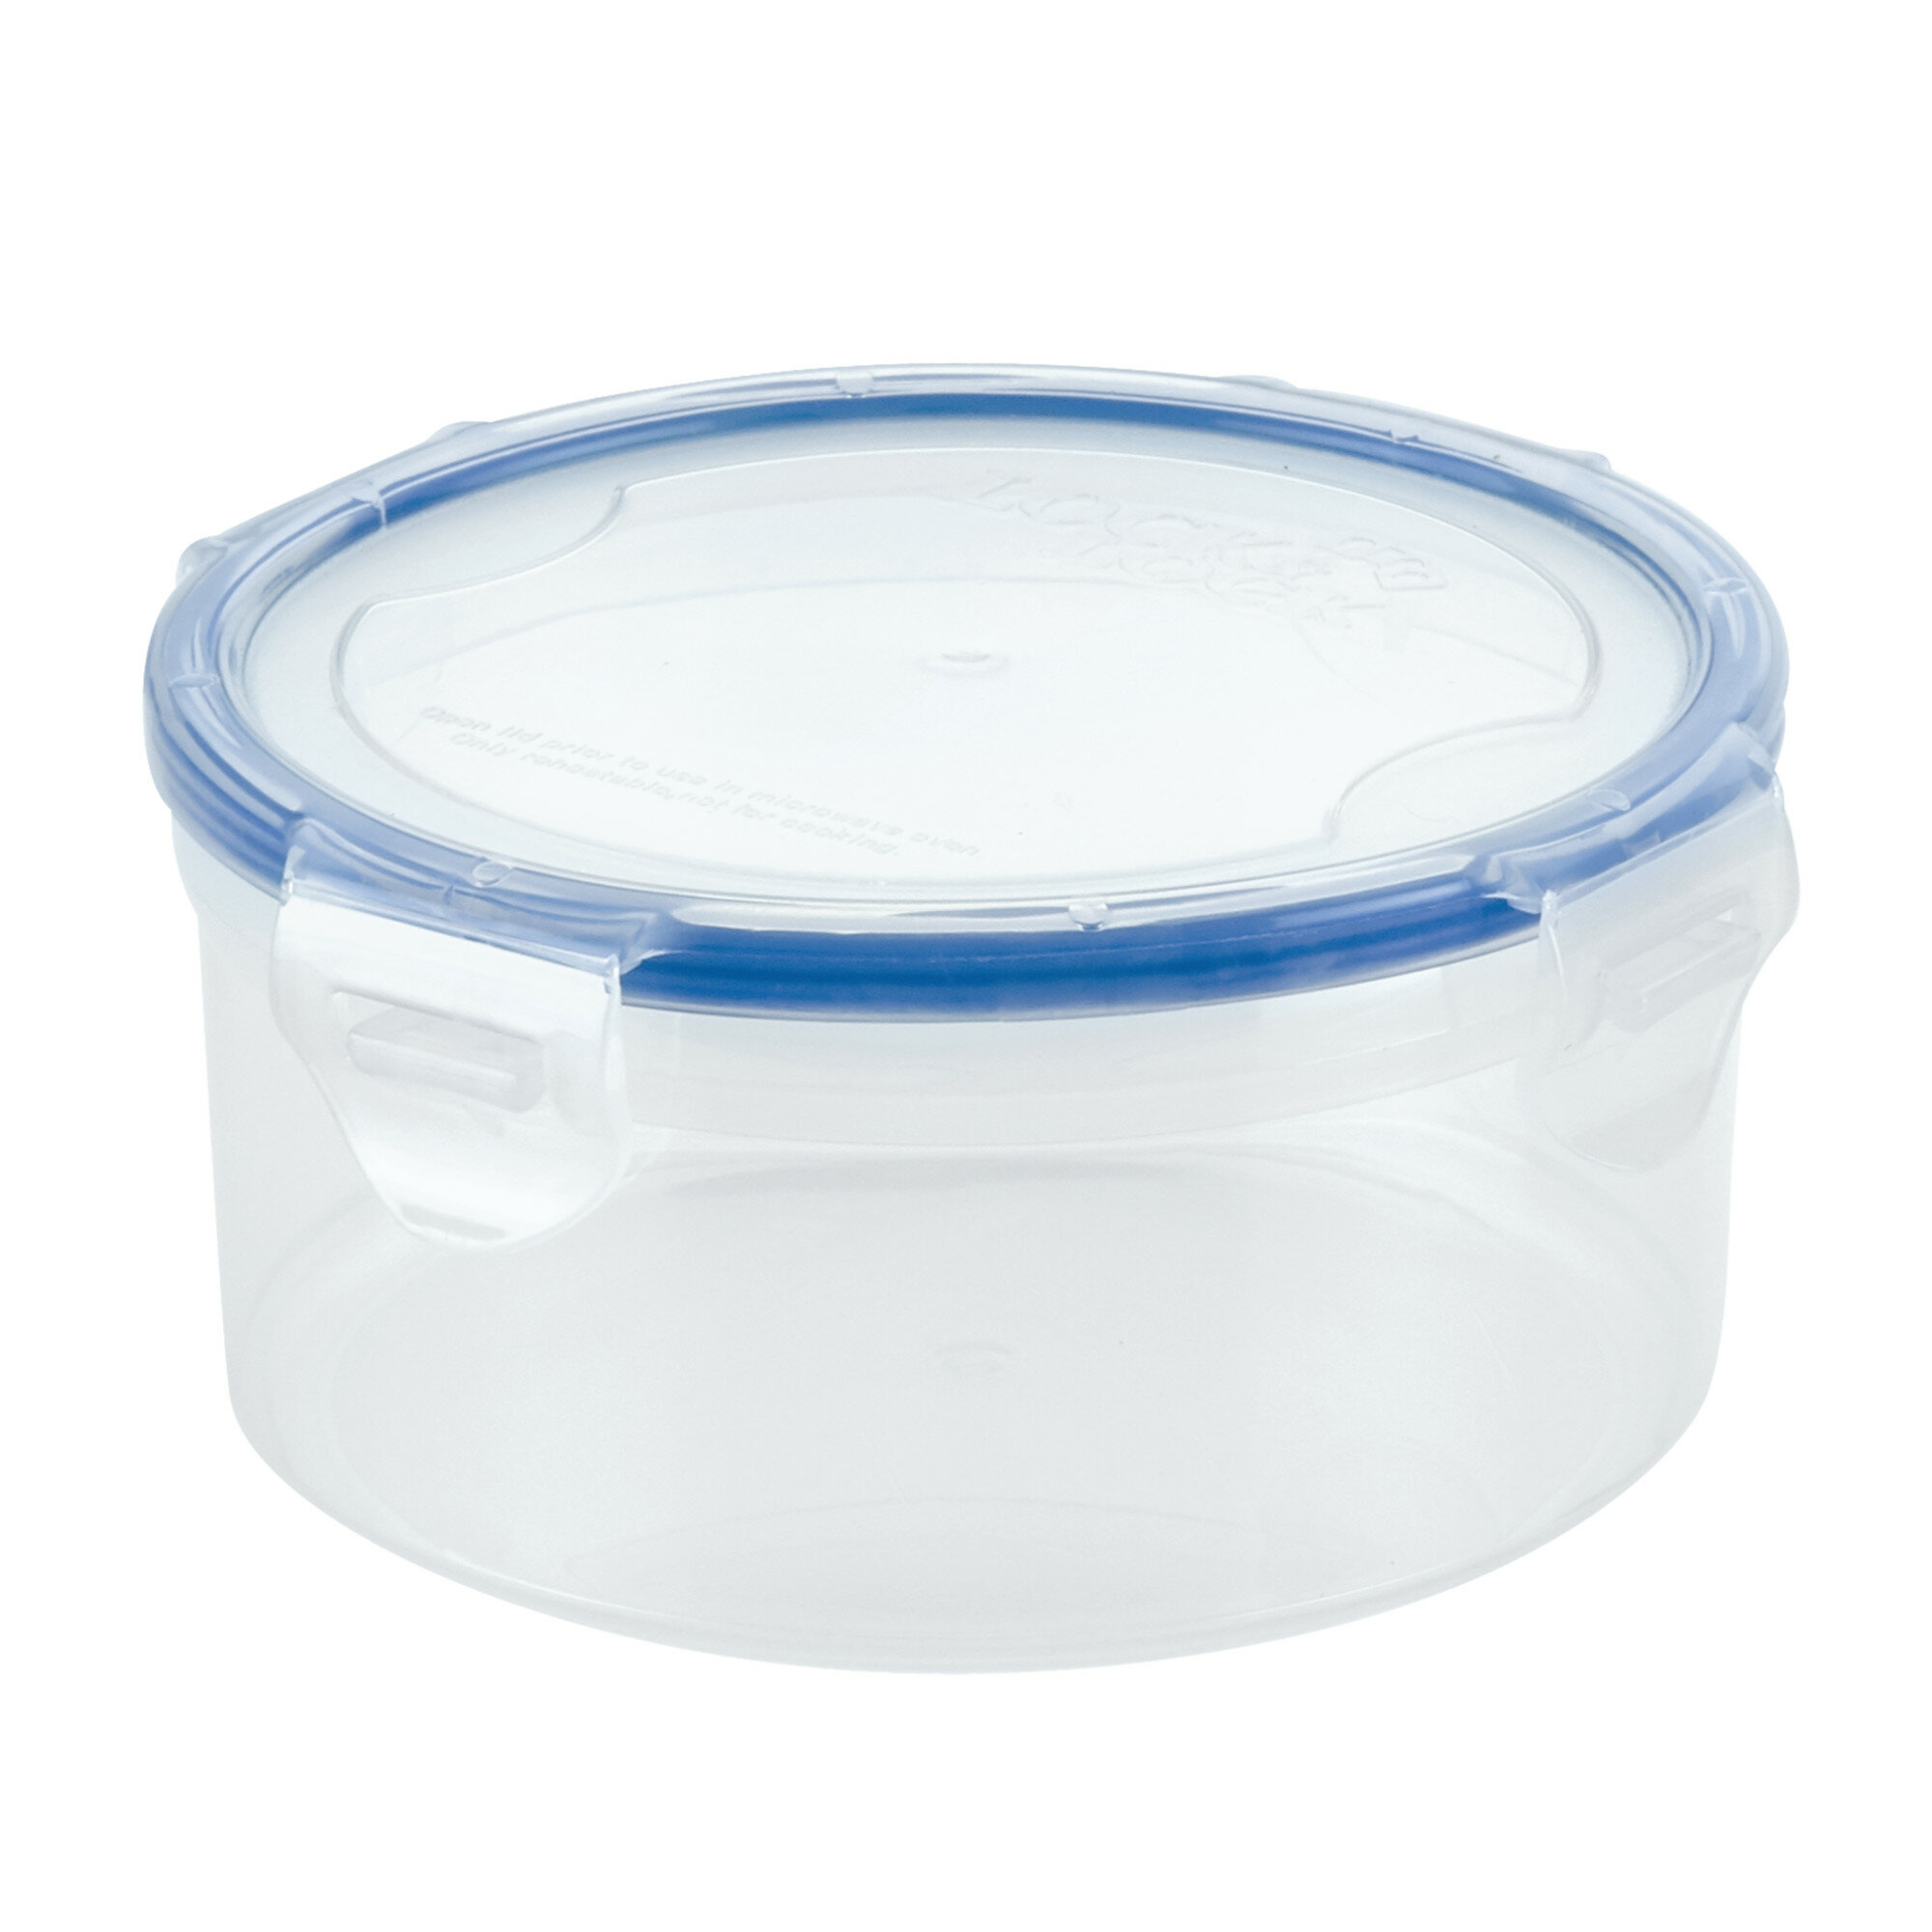 Glad Mini Round Food Storage Containers with Lids - 8 pk - Clear